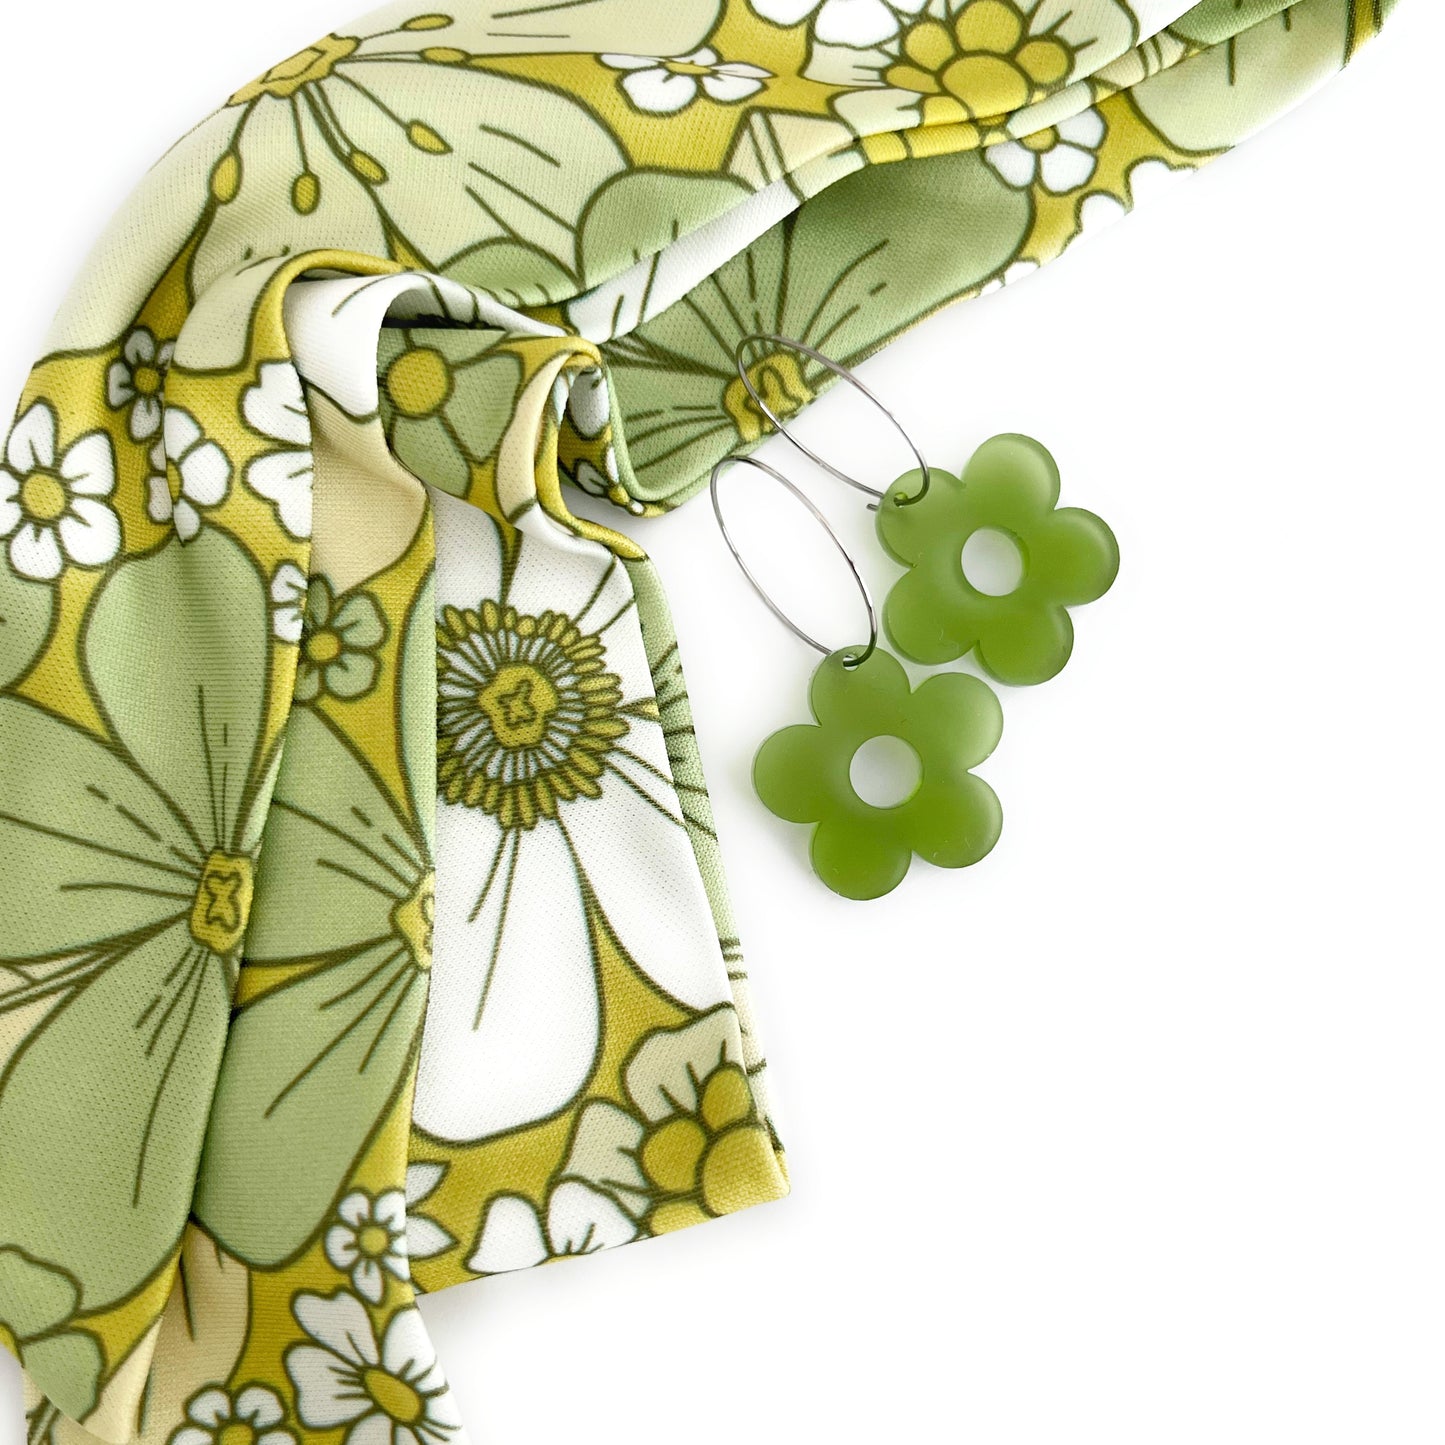 THE BEST EARRINGS/HEADBAND Gift Set in Retro Mustard Yellow & Green Floral + Daisy Hoops/ Statement Accessories